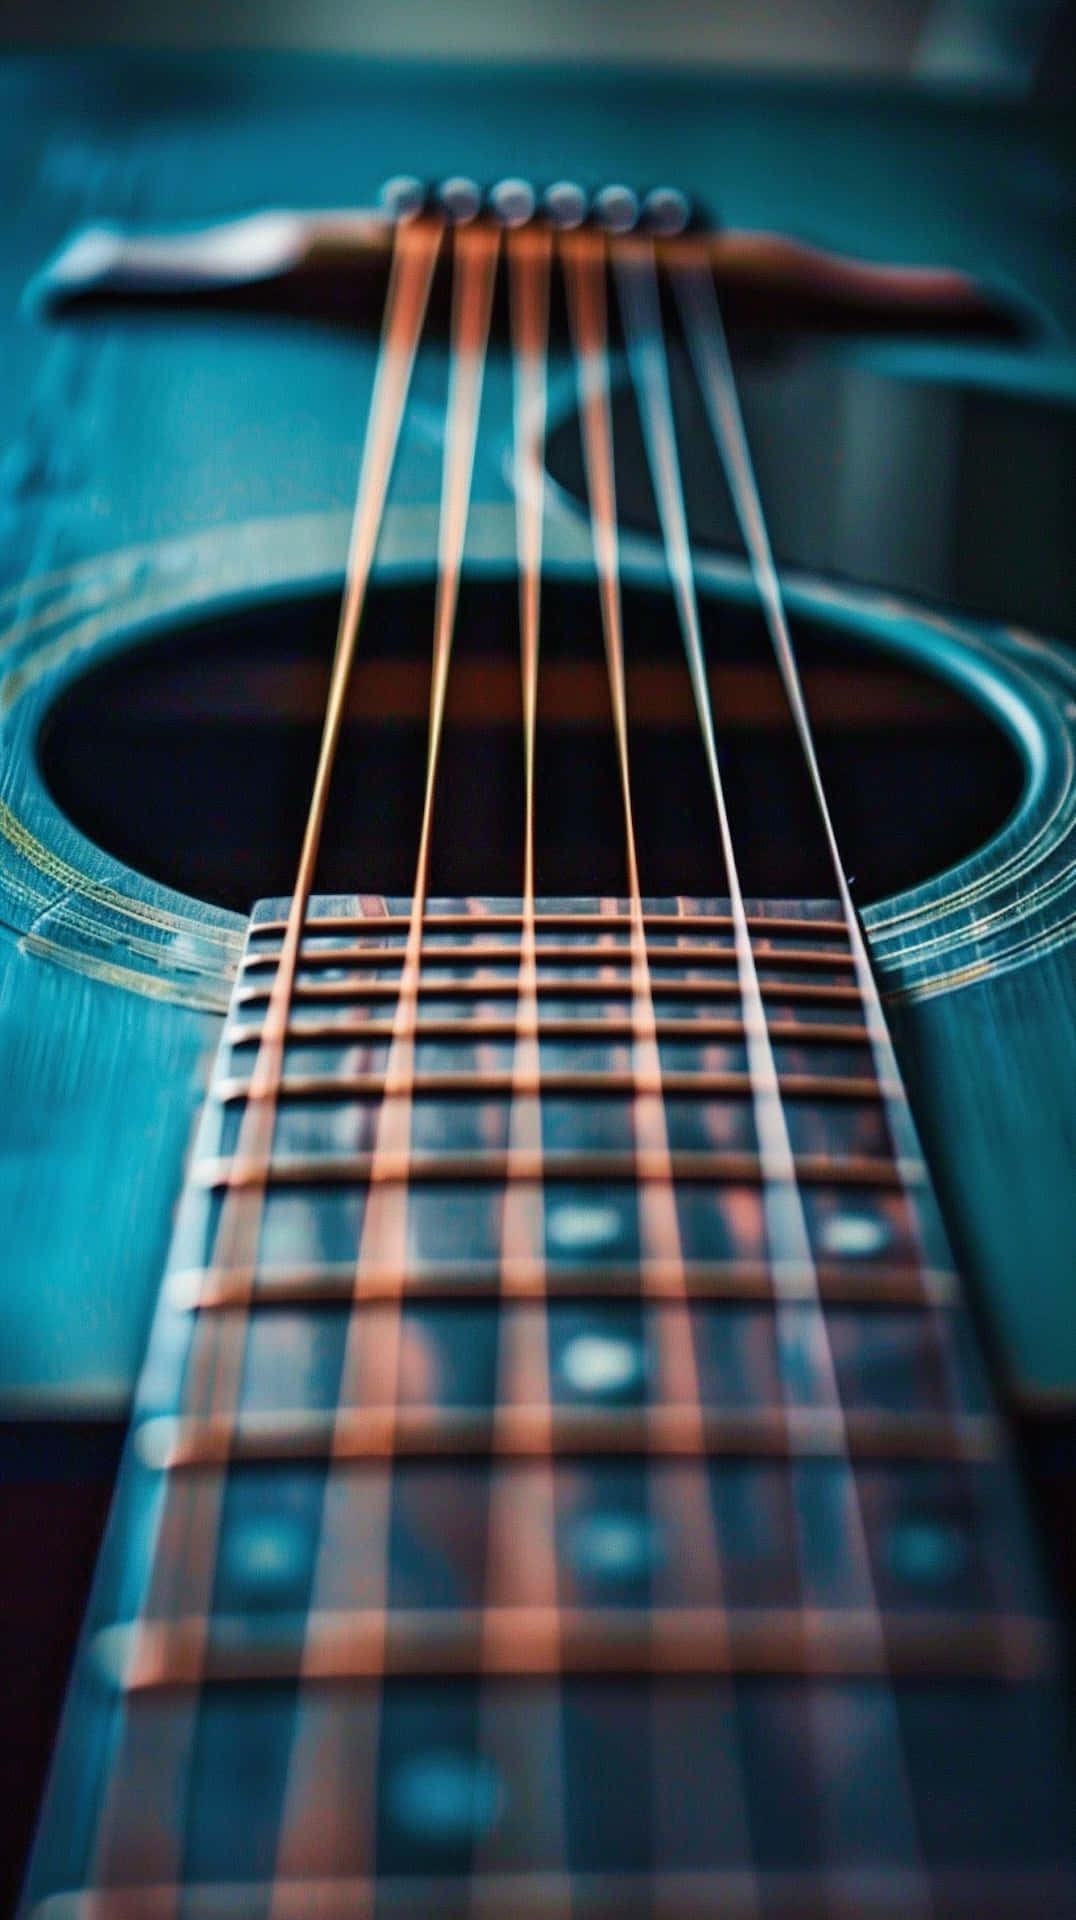 Close Up Acoustic Guitar Strings